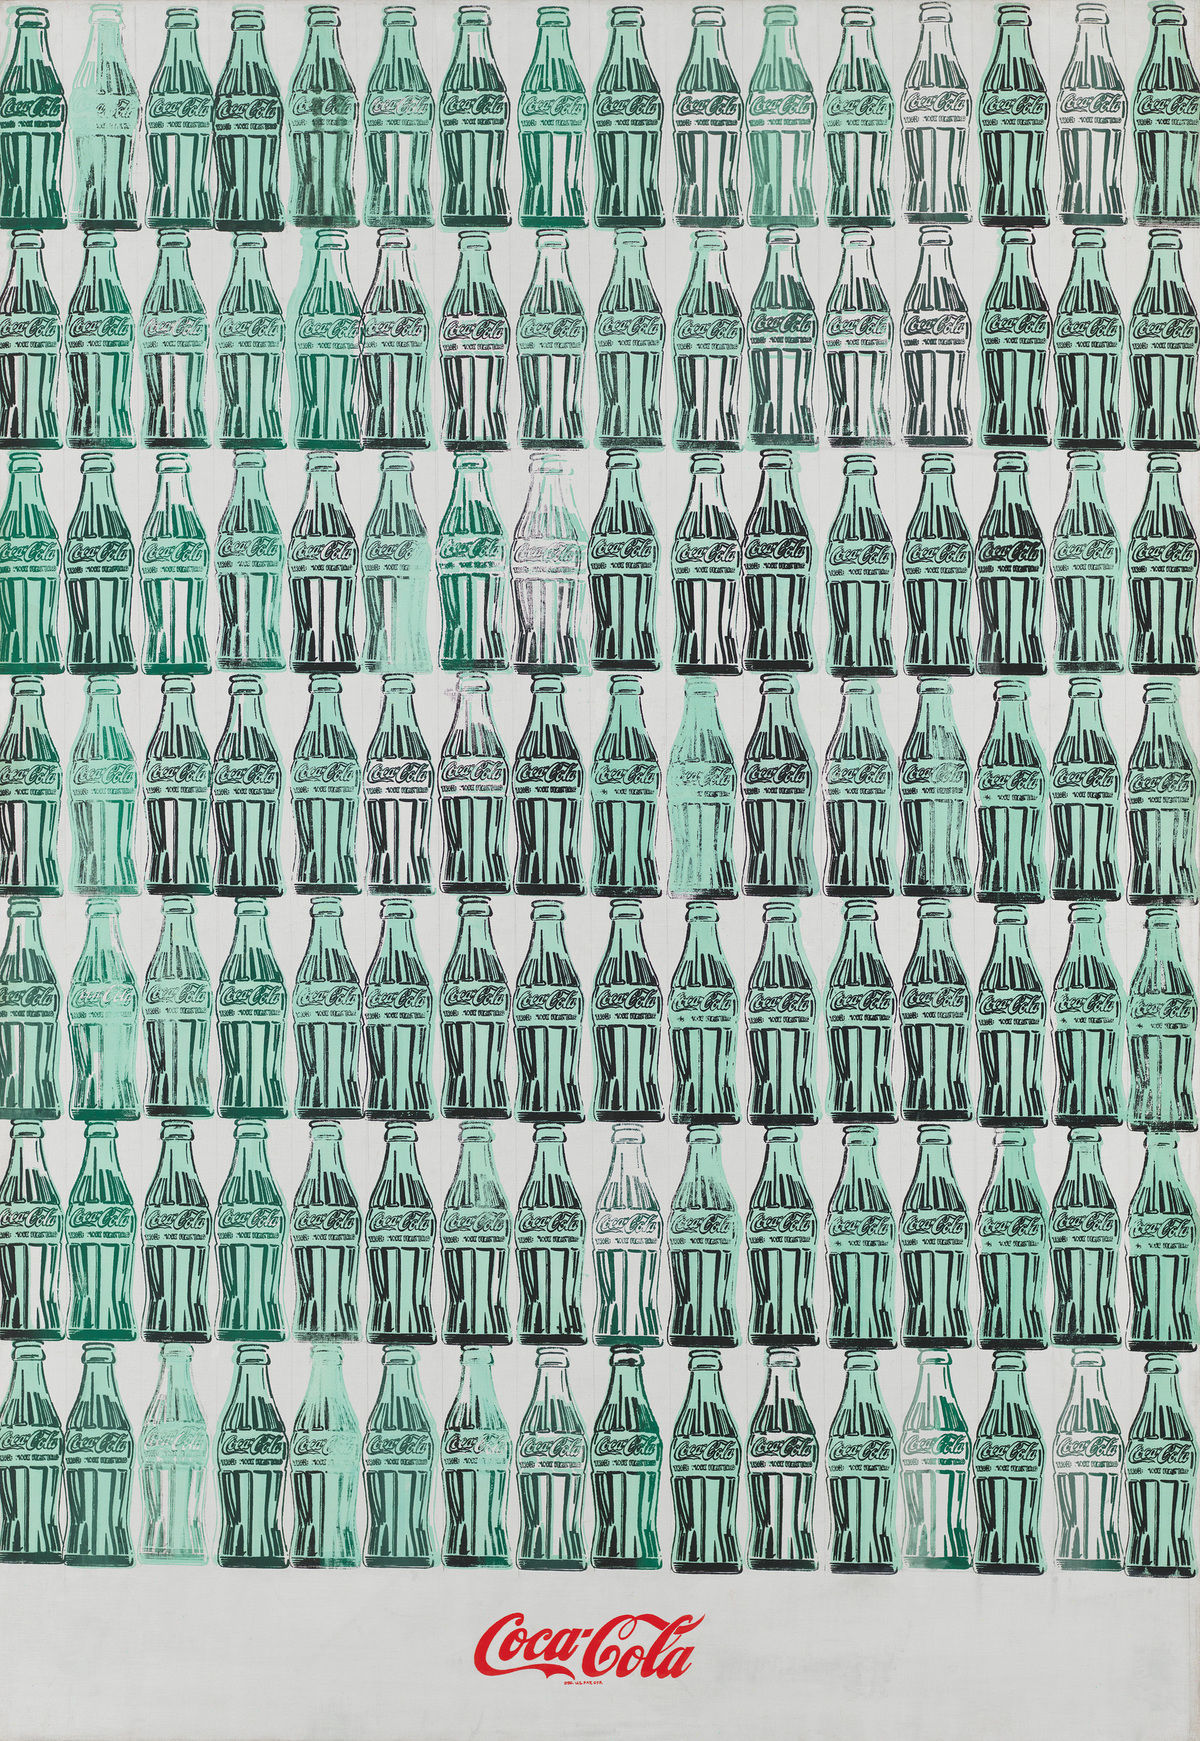 Andy Warhol (1928-1987), Green Coca-Cola Bottles, 1962. Acrylic, screenprint, and graphite pencil on canvas. Overall: 82 3/4 × 57 1/8 in. (210.2 × 145.1 cm). Whitney Museum of American Art, New York; Purchase, with funds from the Friends of the Whitney Museum of American Art 68.25 © Andy Warhol Foundation/Artists Rights Society (ARS) New York; Registered Trademark, The Coca Cola Company. All rights reserved